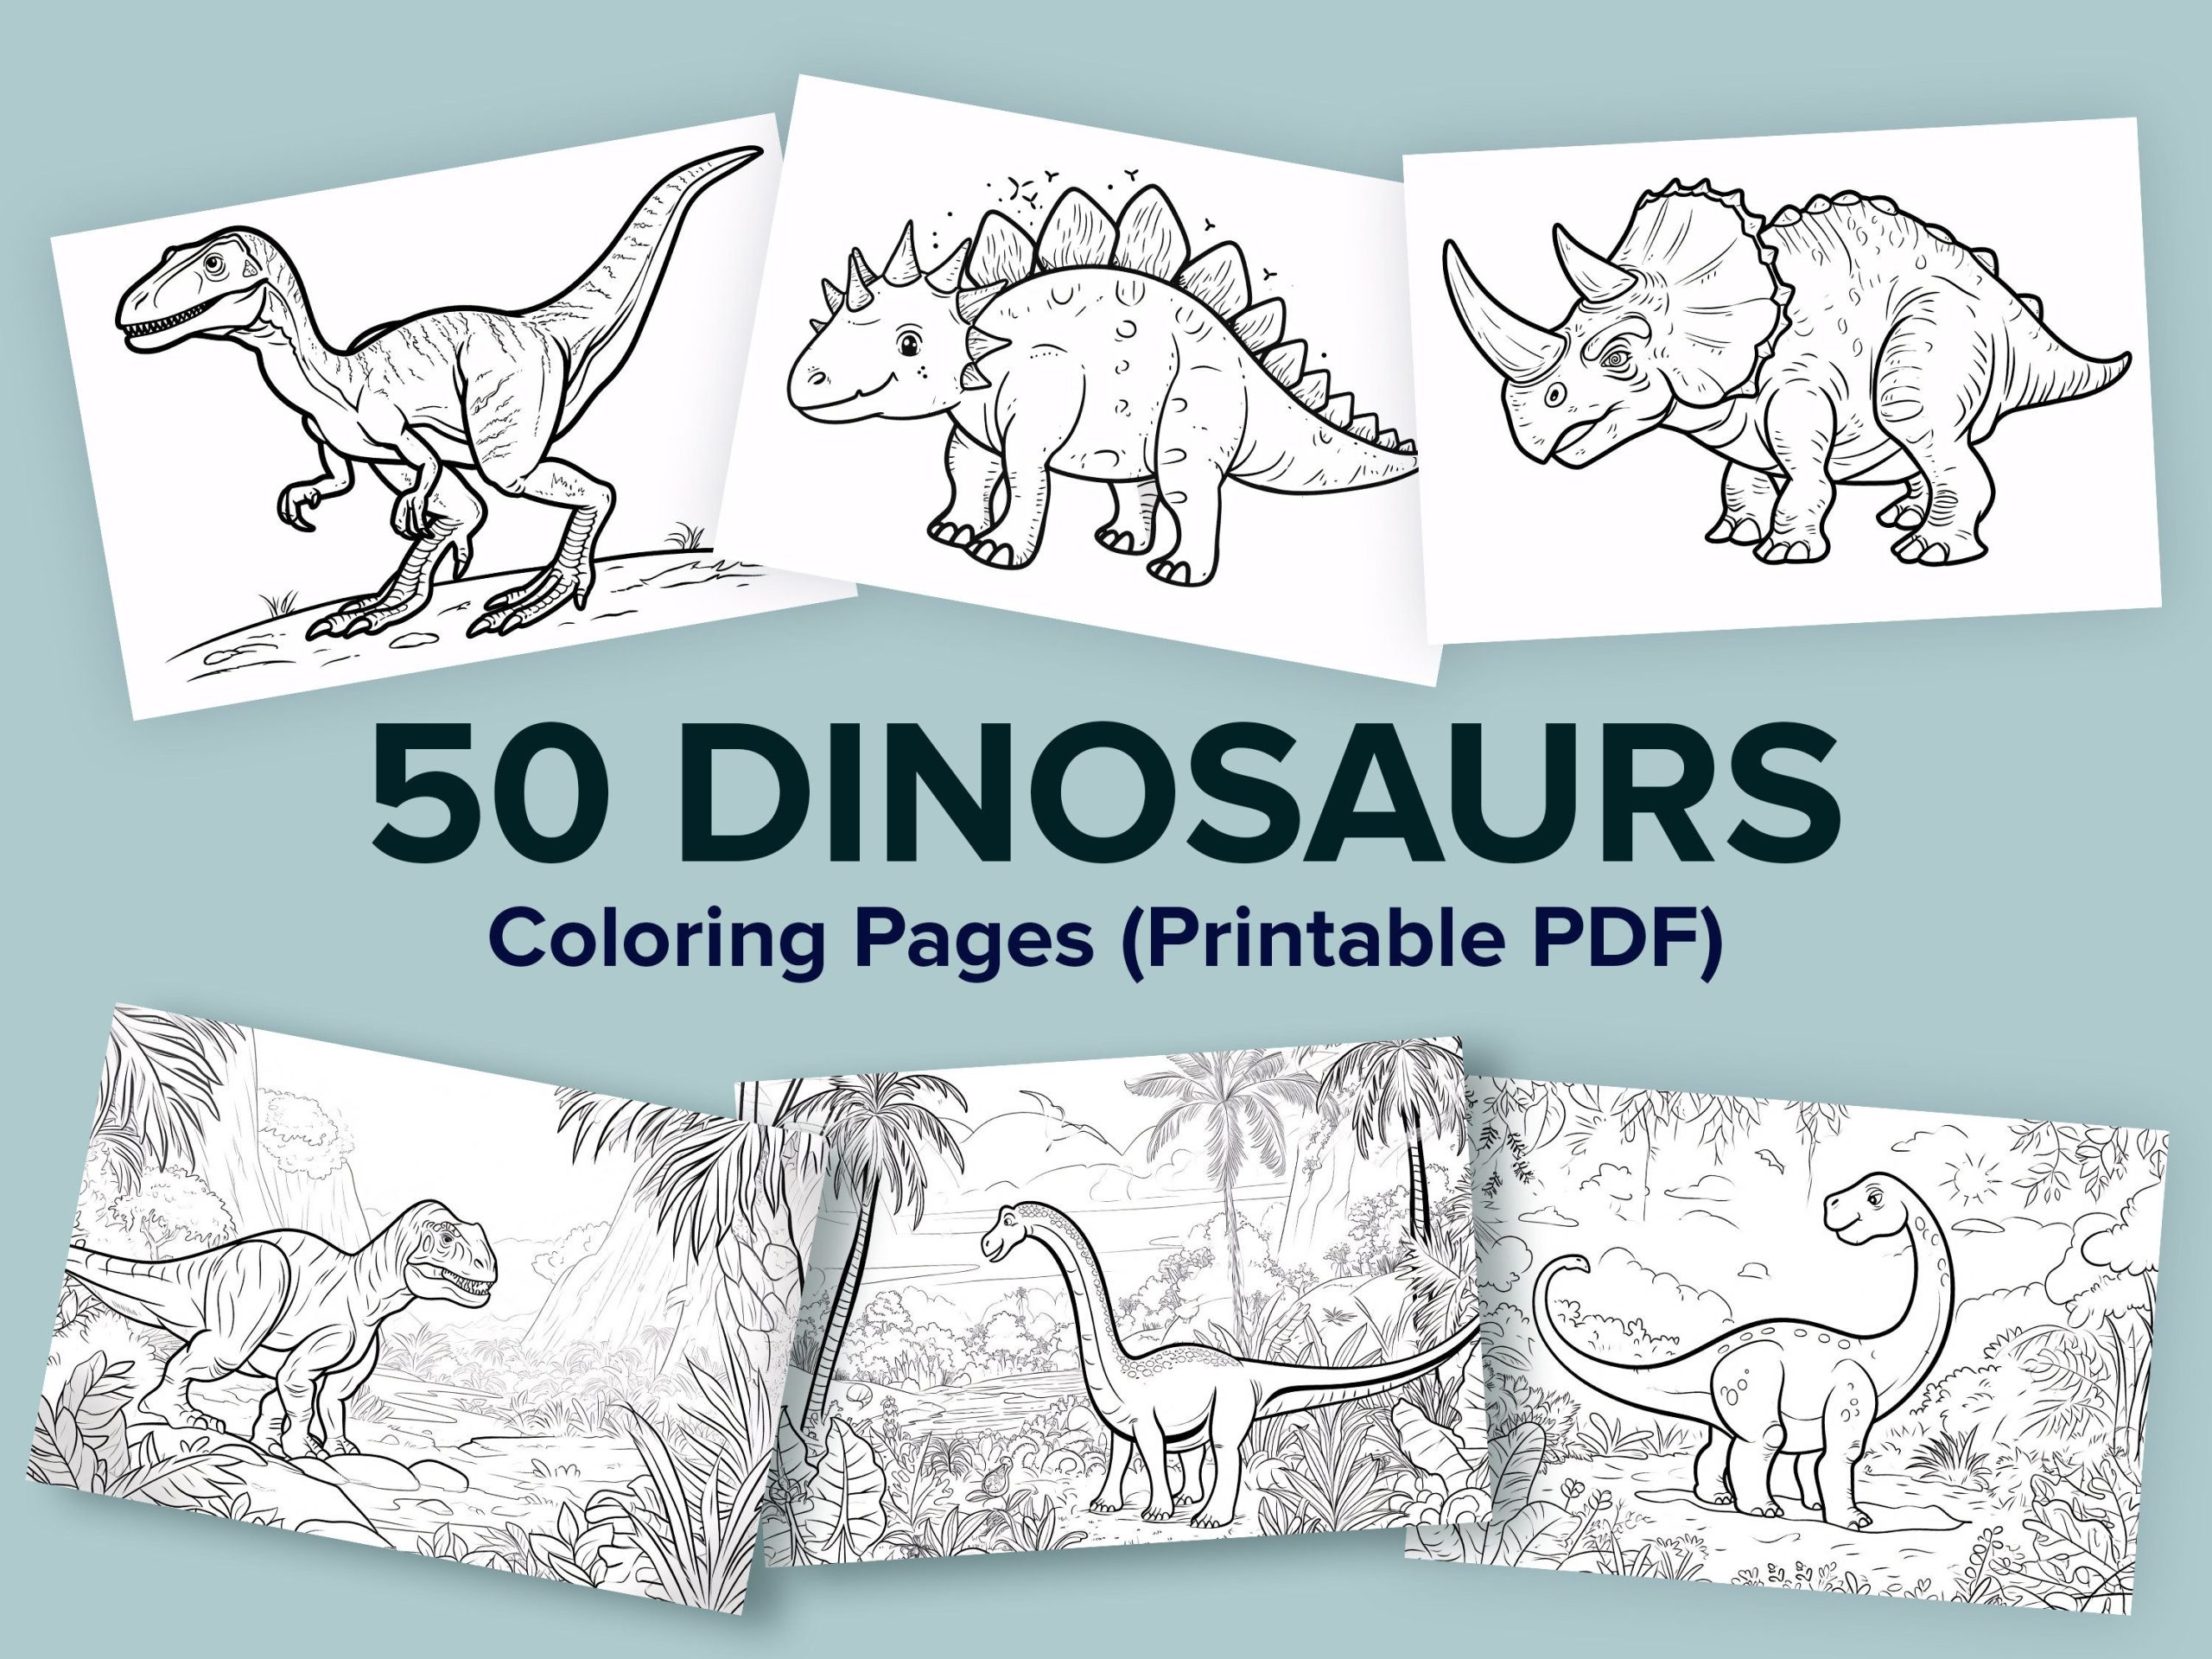 50 Dinosaurs Coloring Pages Toddlers Preschoolers for Kids Coloring Book Lineare Coloring Pages Line Art Dinosaurs Printable Sheets PDF - Etsy